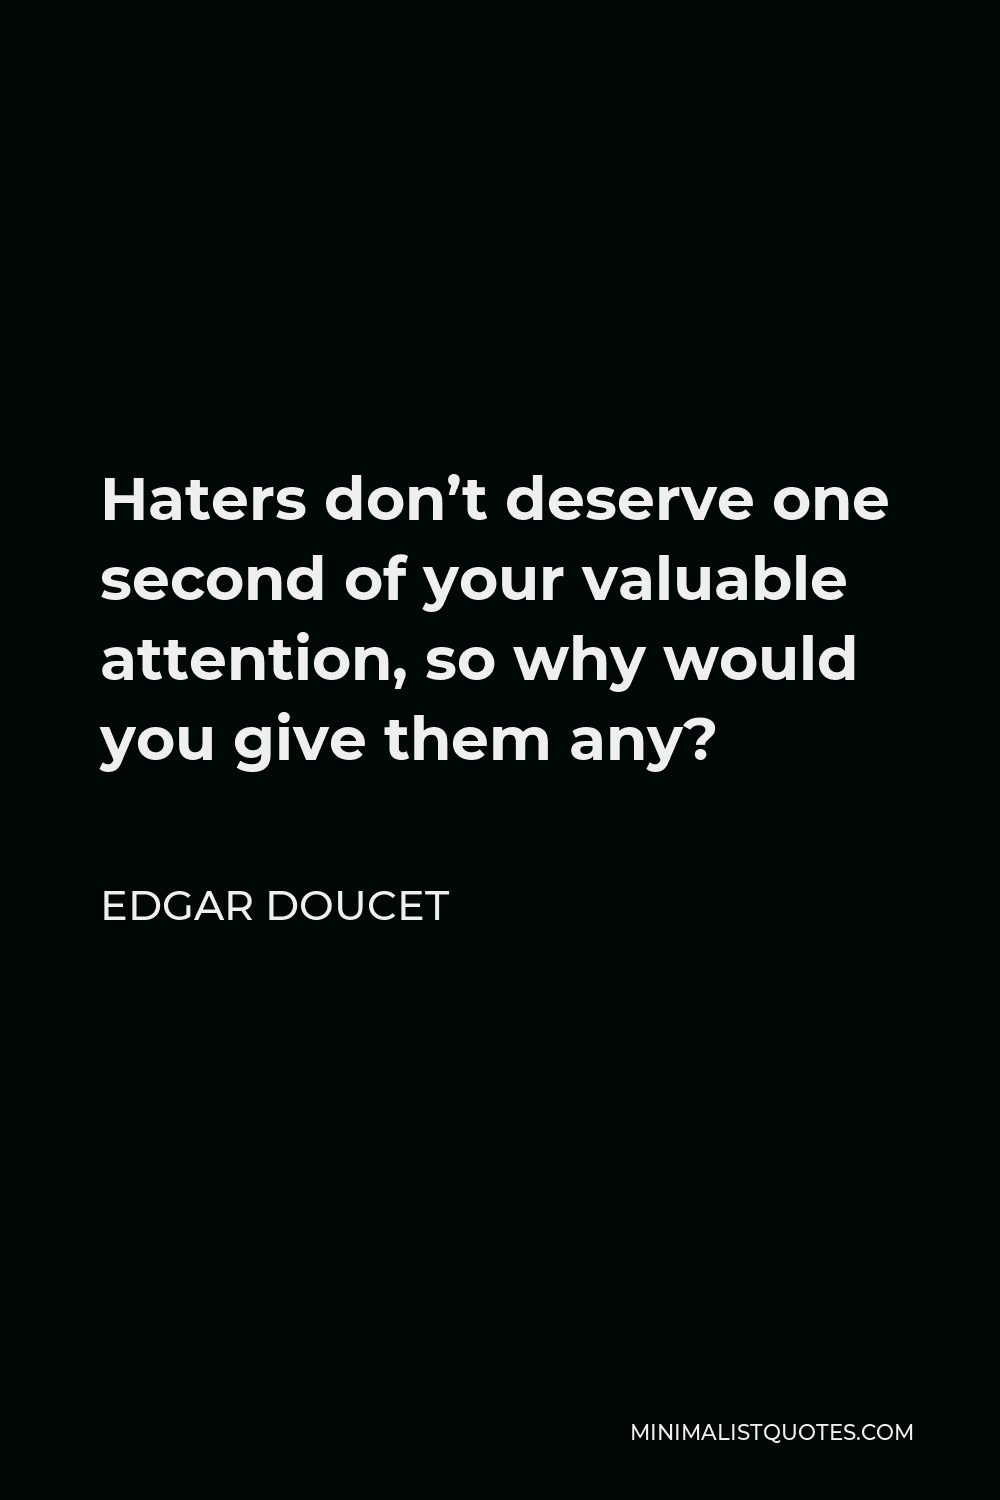 Edgar Doucet Quote - Haters don’t deserve one second of your valuable attention, so why would you give them any?